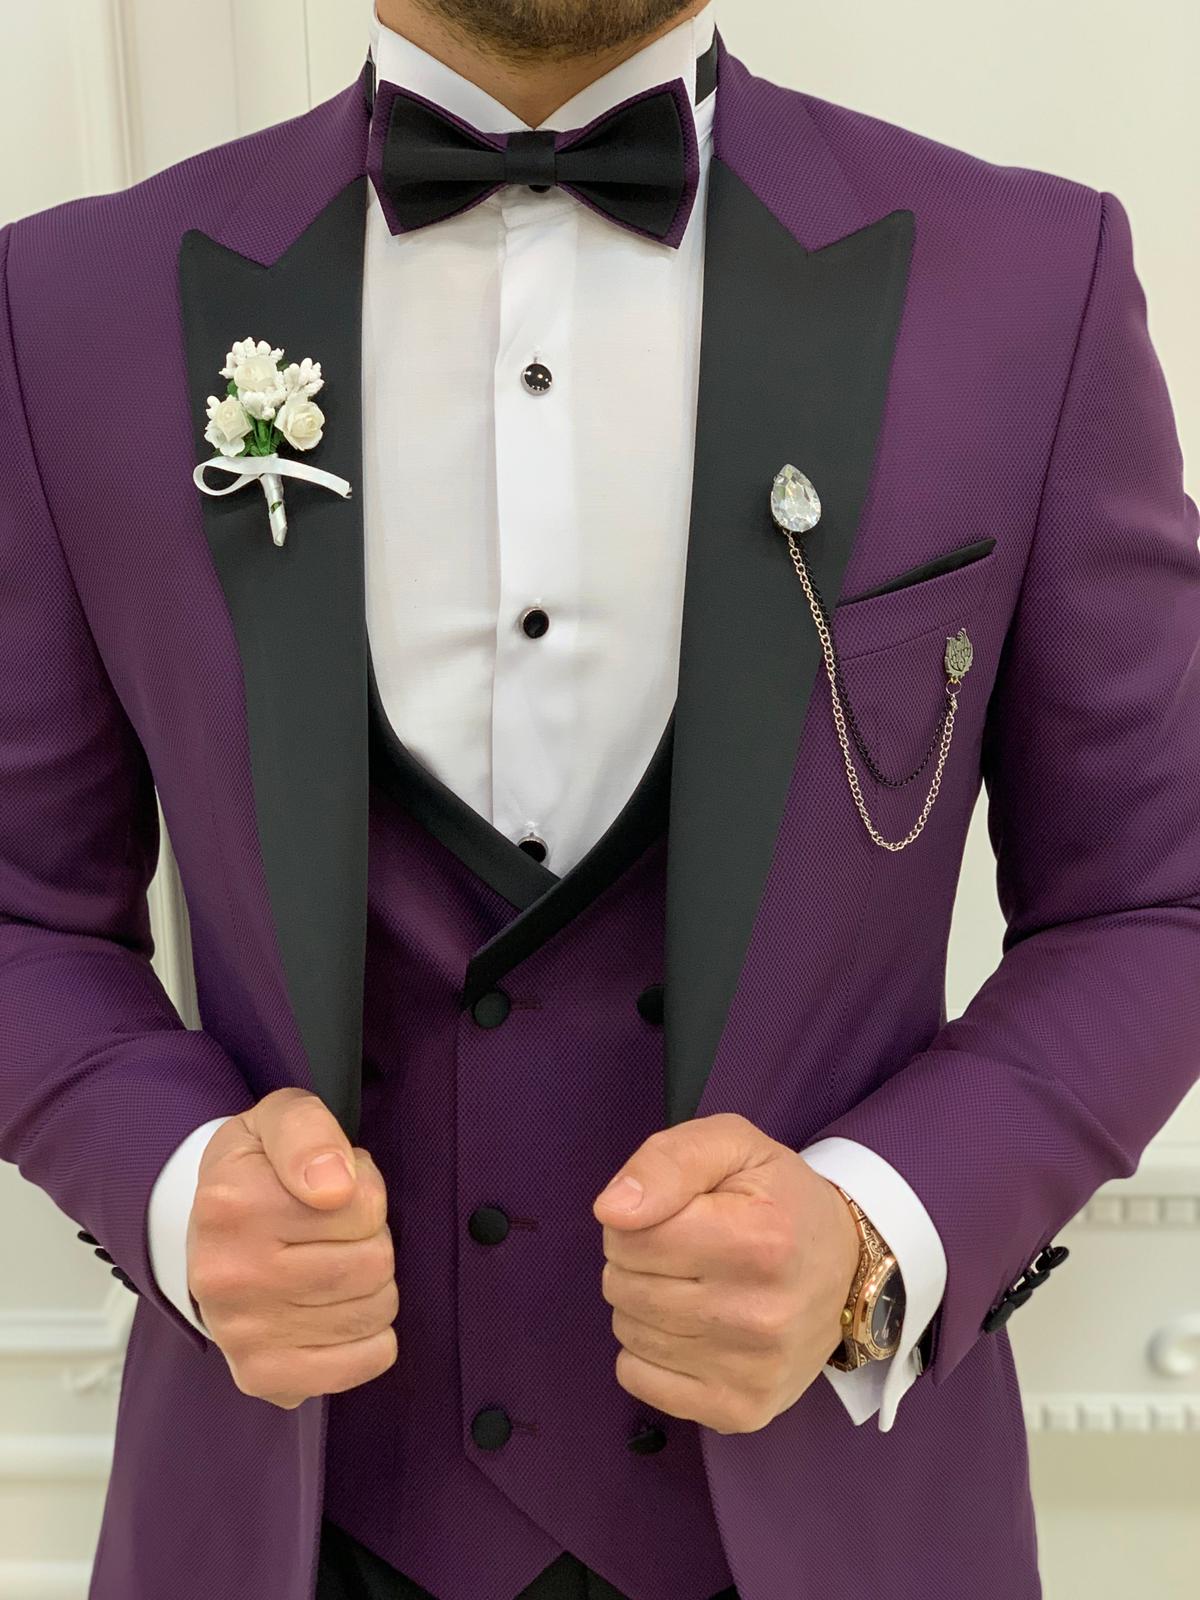 Light Purple Slim Fit Purple Suit Men With Notched Lapel For Formal  Weddings And Proms Two Piece Tuxedo For Men From Zifenmi, $93.87